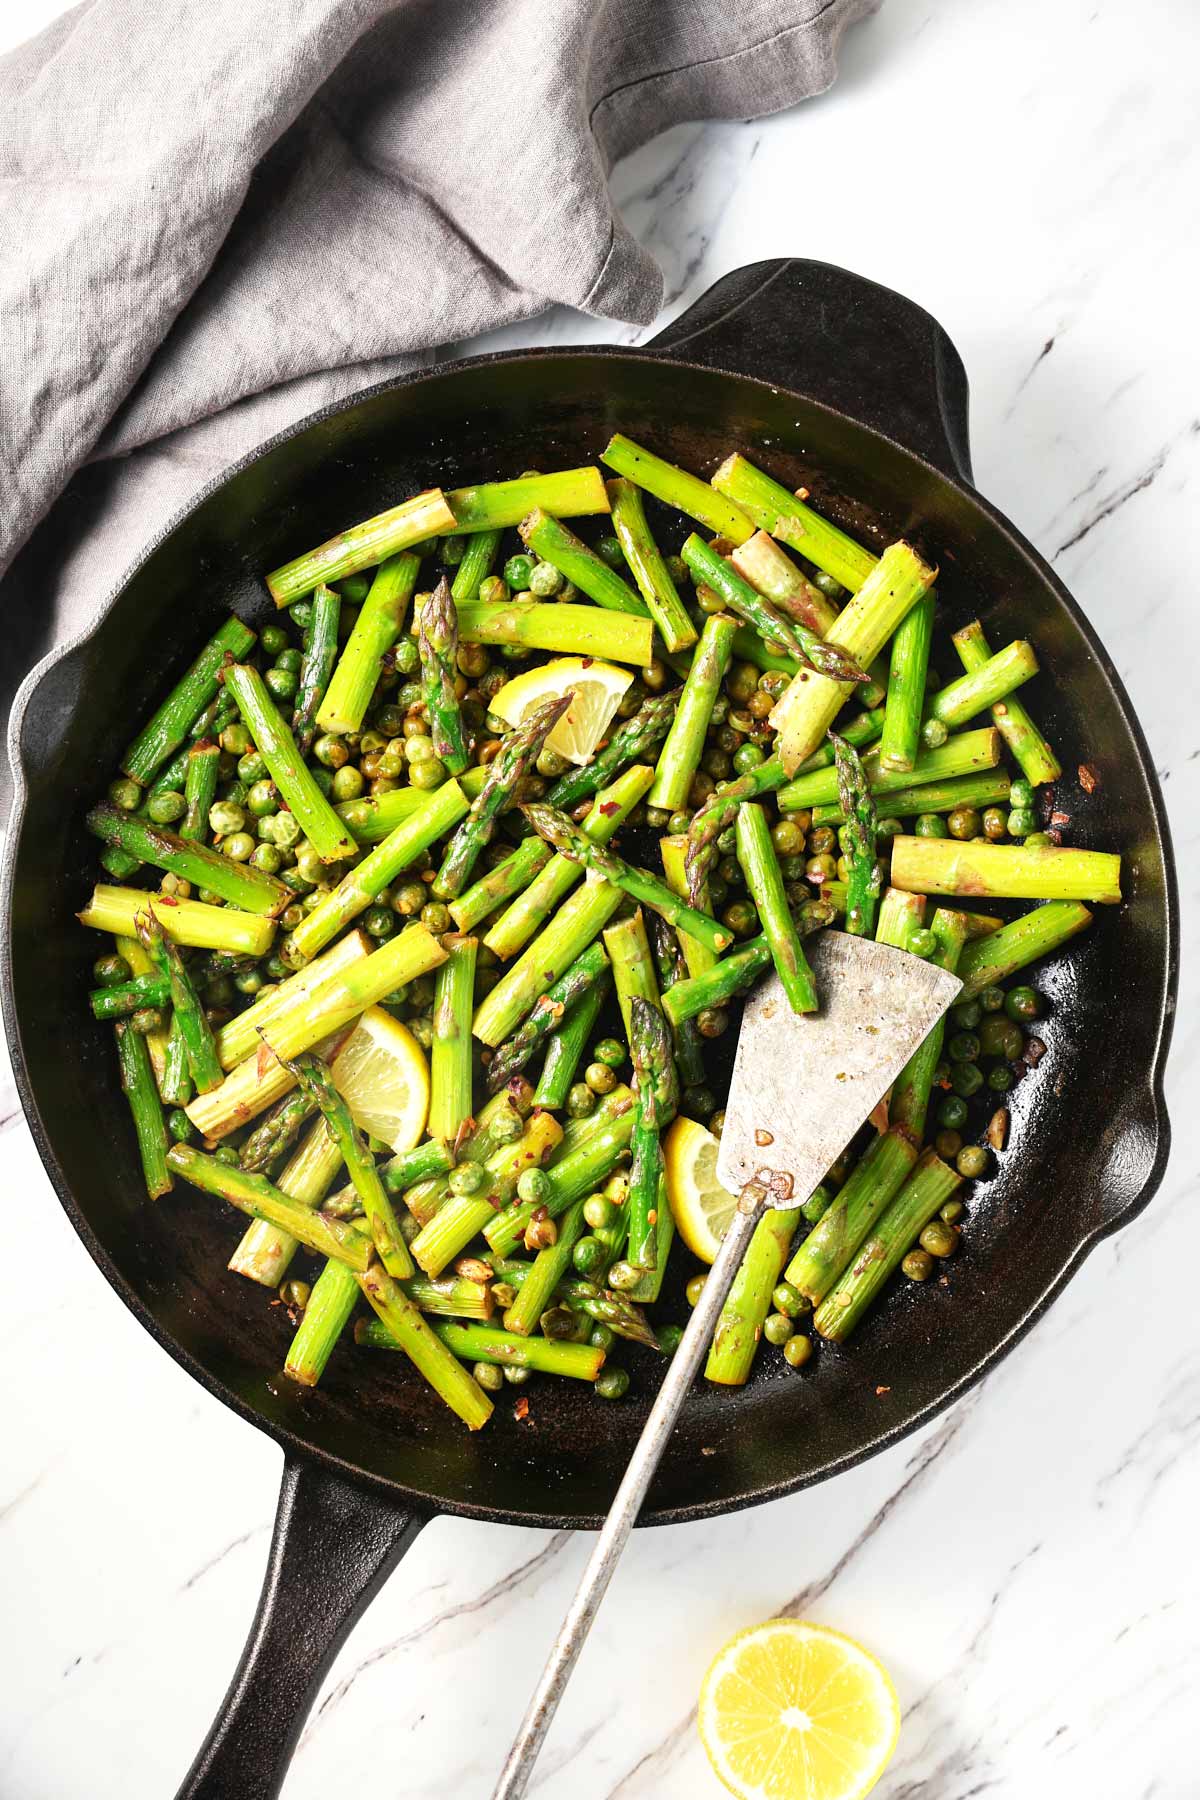 Roasted asparagus and peas in a cast iron pan with a metal spatula. On the side, there is a gray napkin and a lemon piece. 
